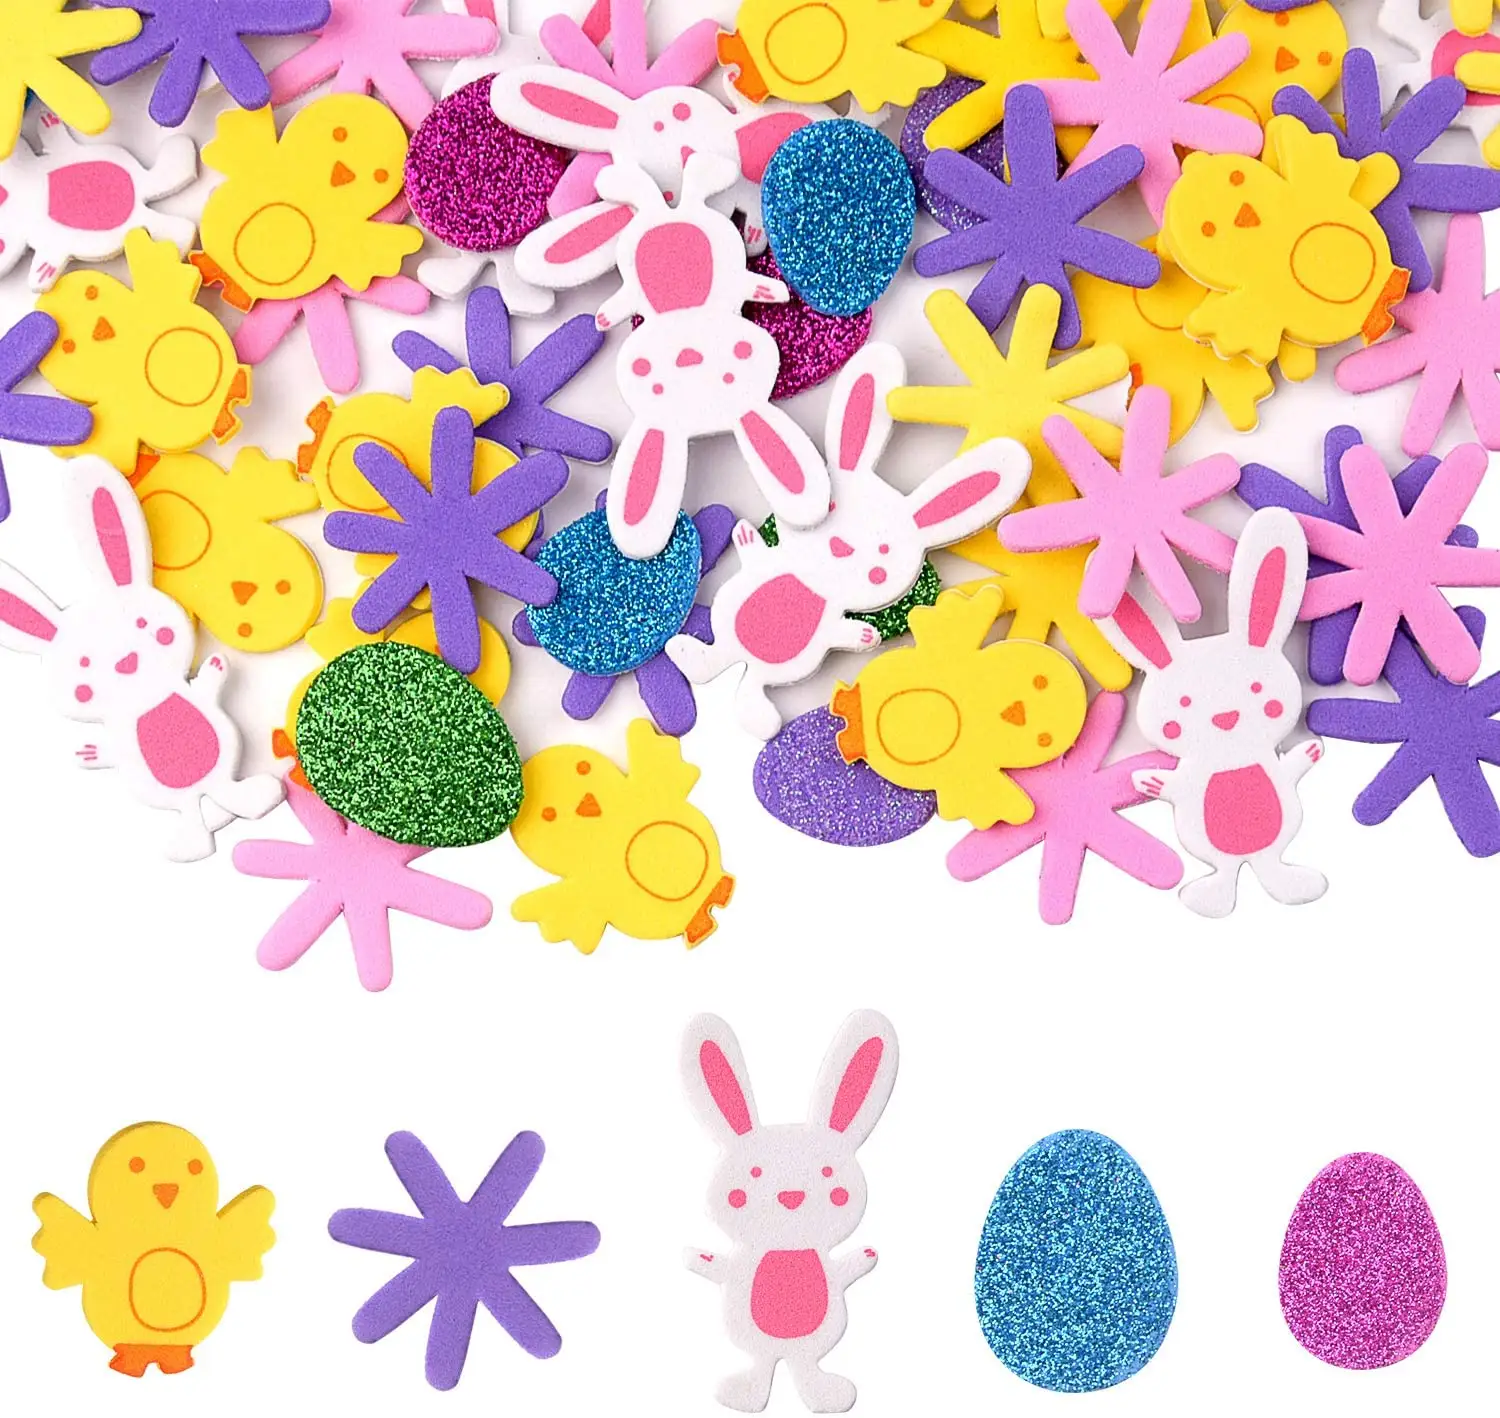 Xieli 160 Pcs Easter Foam Stickers Animal Shape Self Adhesive Easter Stickers Glitter Egg Stickers for Easter Party Decoration